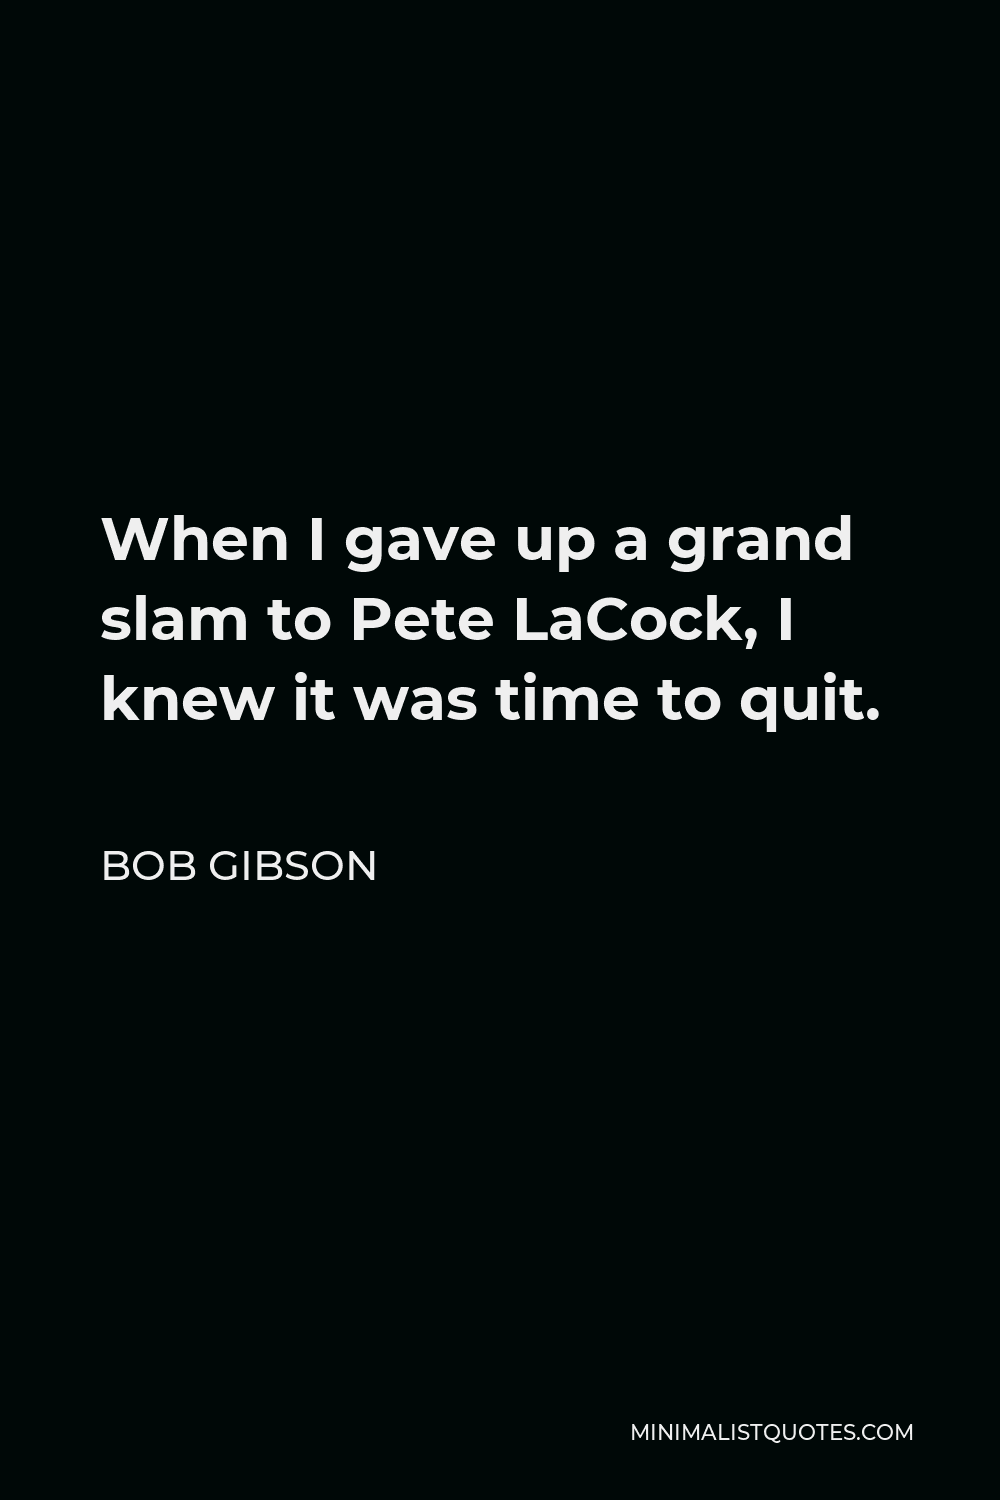 Bob Gibson Quote - When I gave up a grand slam to Pete LaCock, I knew it was time to quit.